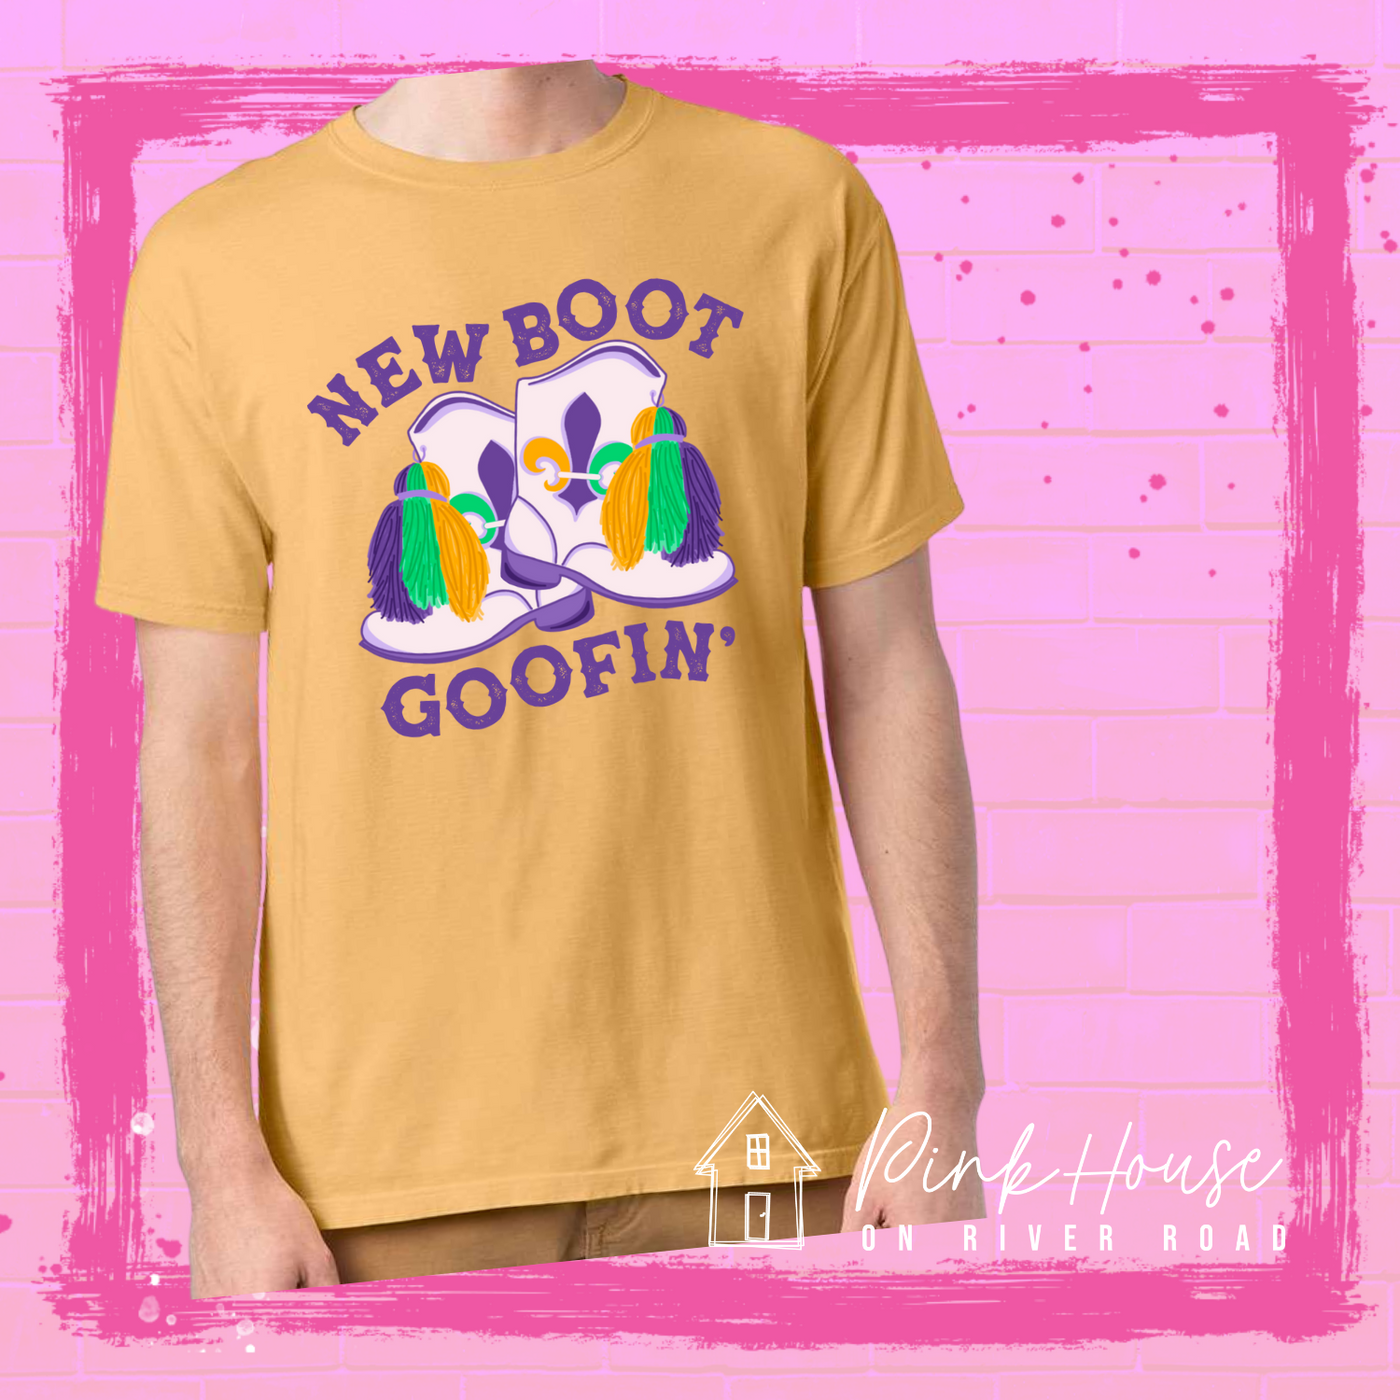 A Mustard tee with a graphic. Graphic is of a pair of majorette boots, the boots have a tassel and fleur de lis both in gold, green and purple. the words New Boot are above the boots and the word goofin' is below thee boots the words are in purple.